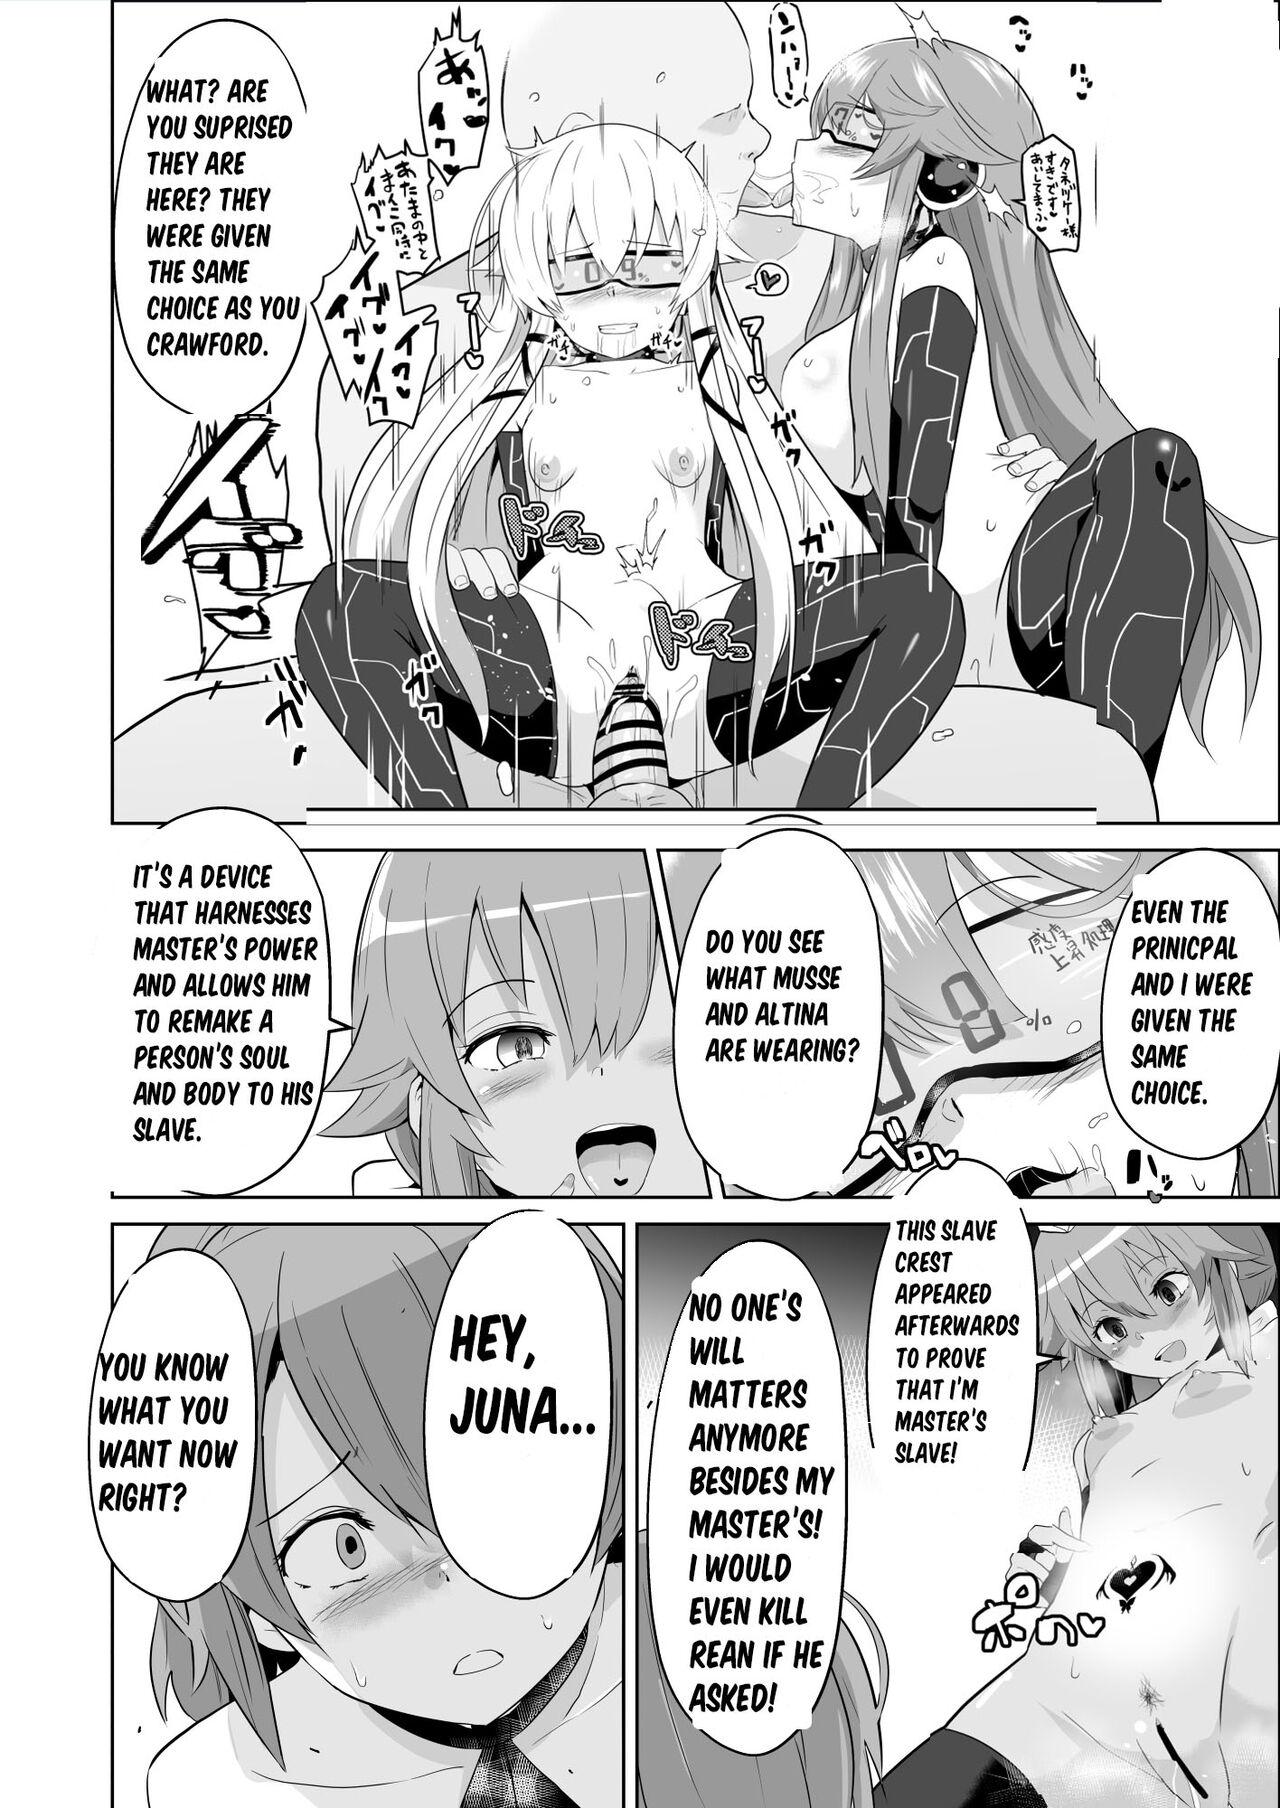 Arabic Hypnosis of the New Class VII - Truth & Acceptance - The legend of heroes | eiyuu densetsu Hot Pussy - Page 4